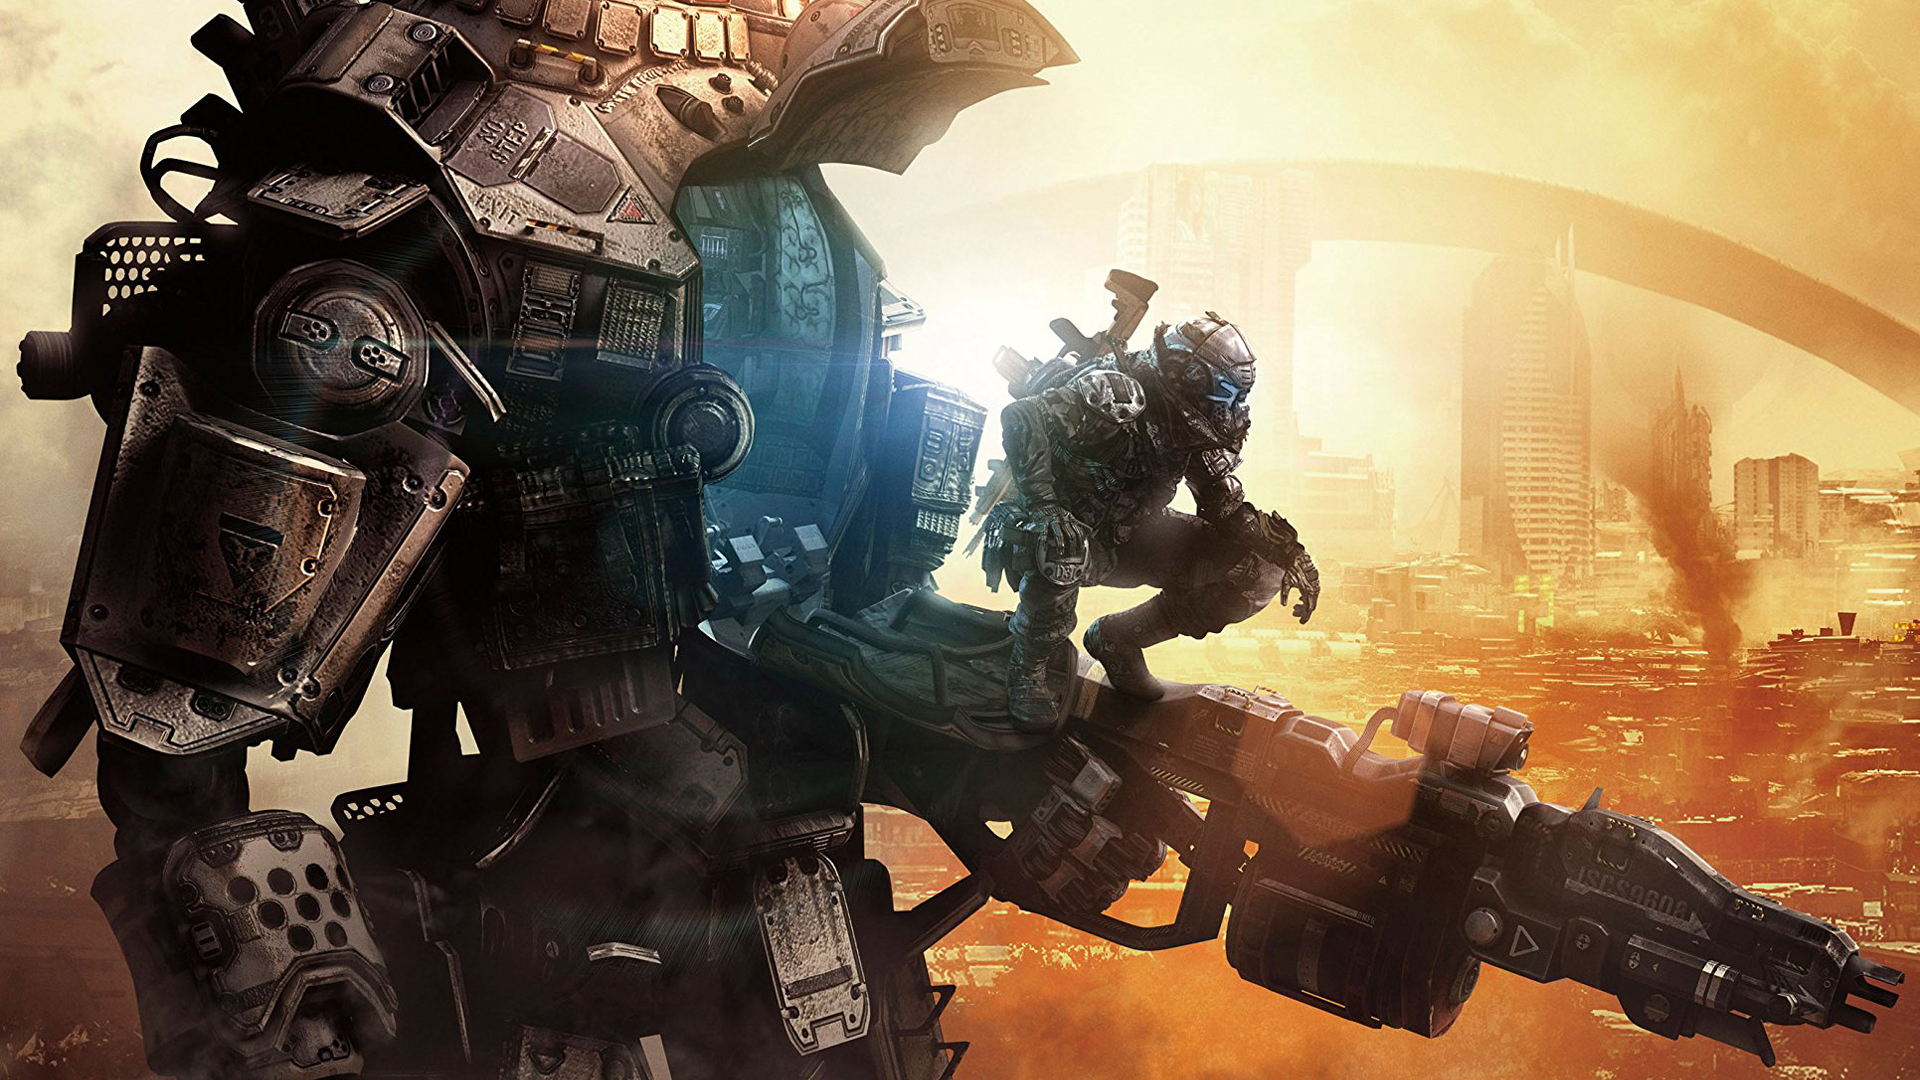 Titanfall isn’t abandoned but only has “one or two people” working on it